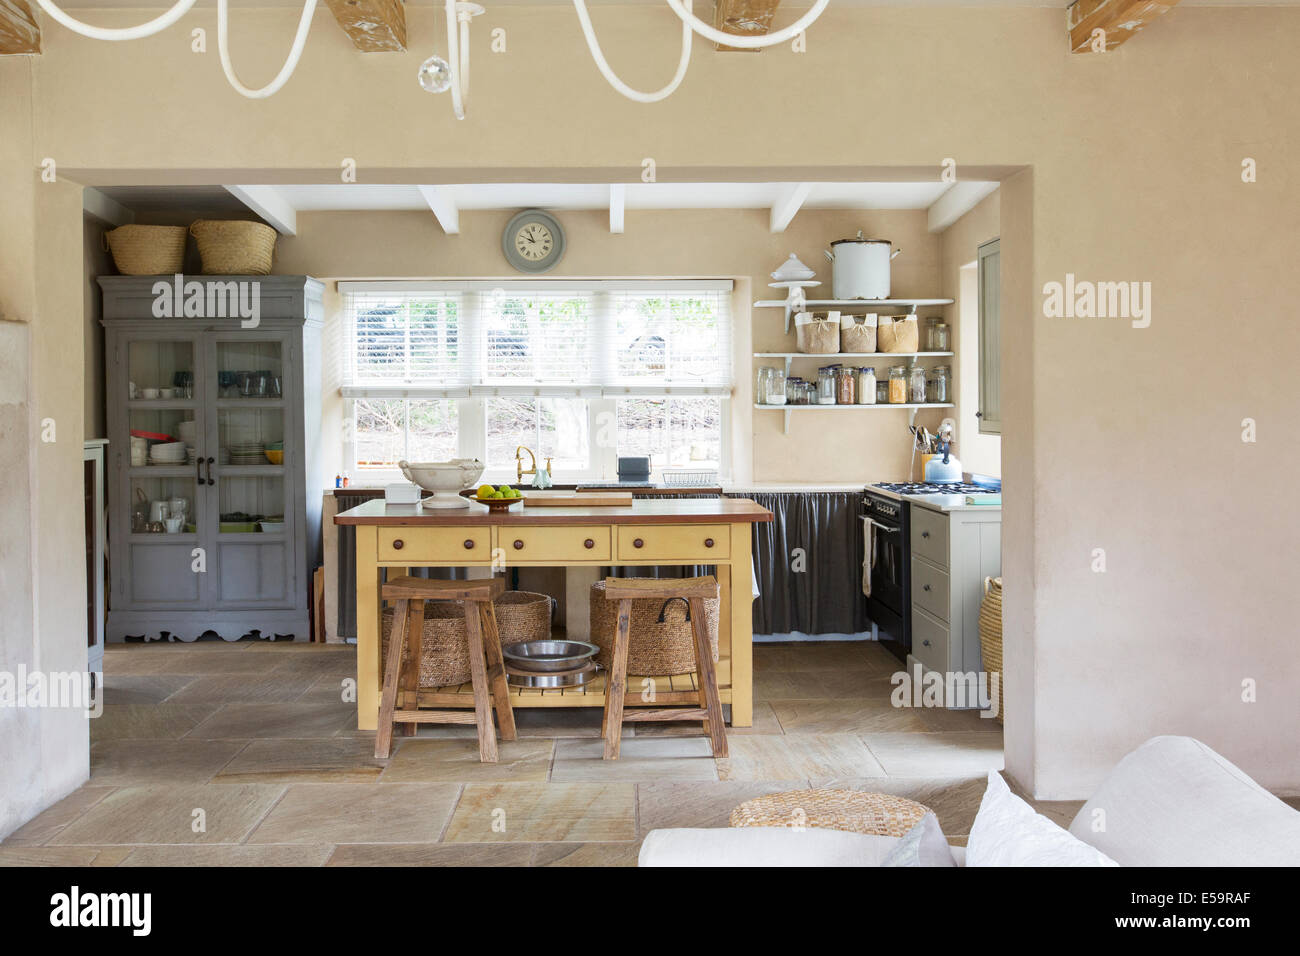 Island in kitchen of rustic house Stock Photo